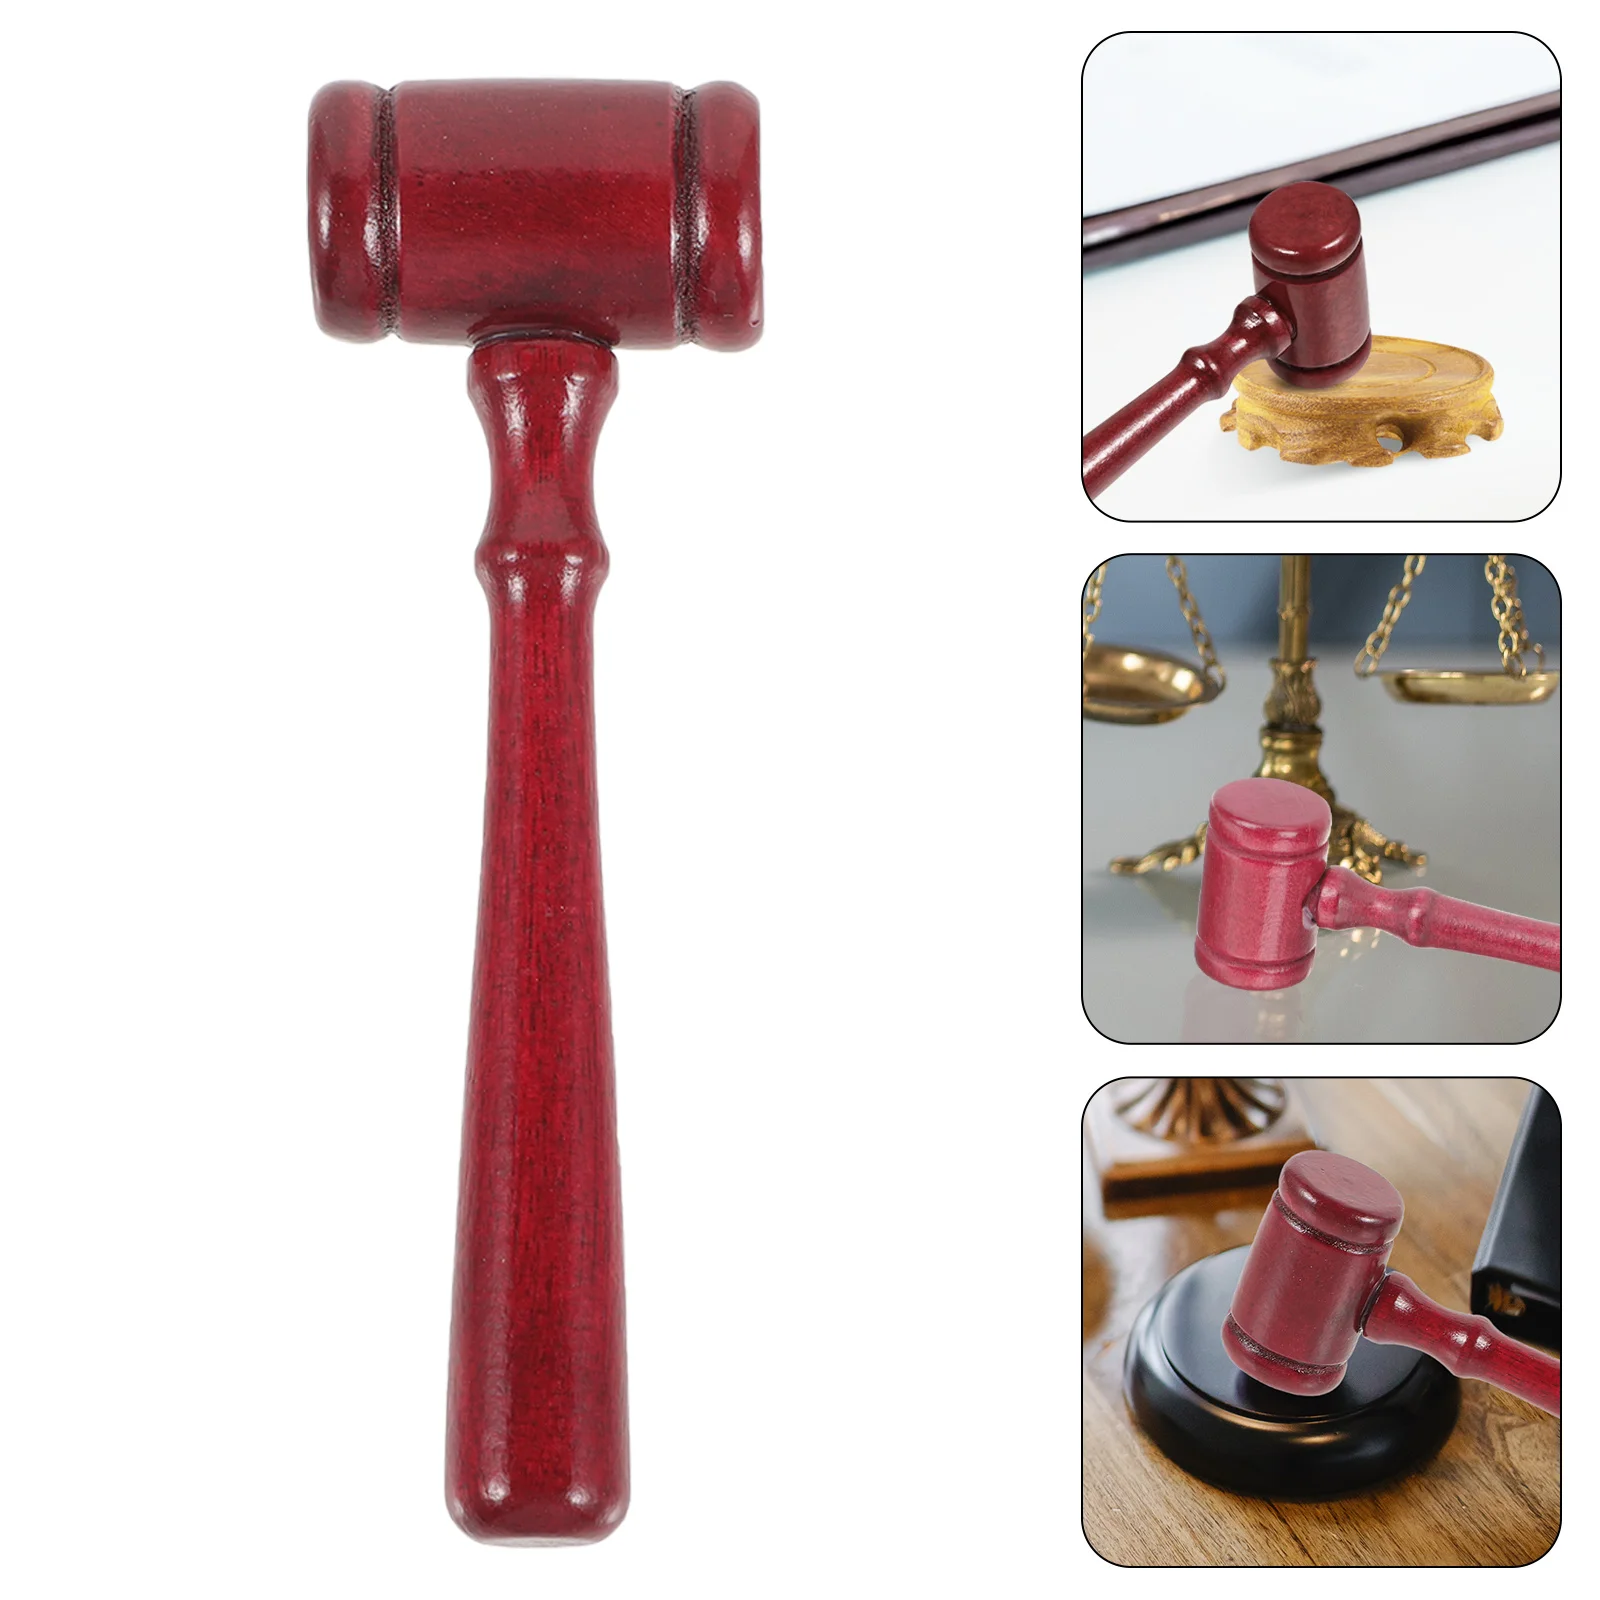 

Gadpiparty Car Gadgets 50 Pack Judge Gavel Prop Mini Wooden Gavel Cosplay Lawyer Judge Auction Justice Costume Accessories